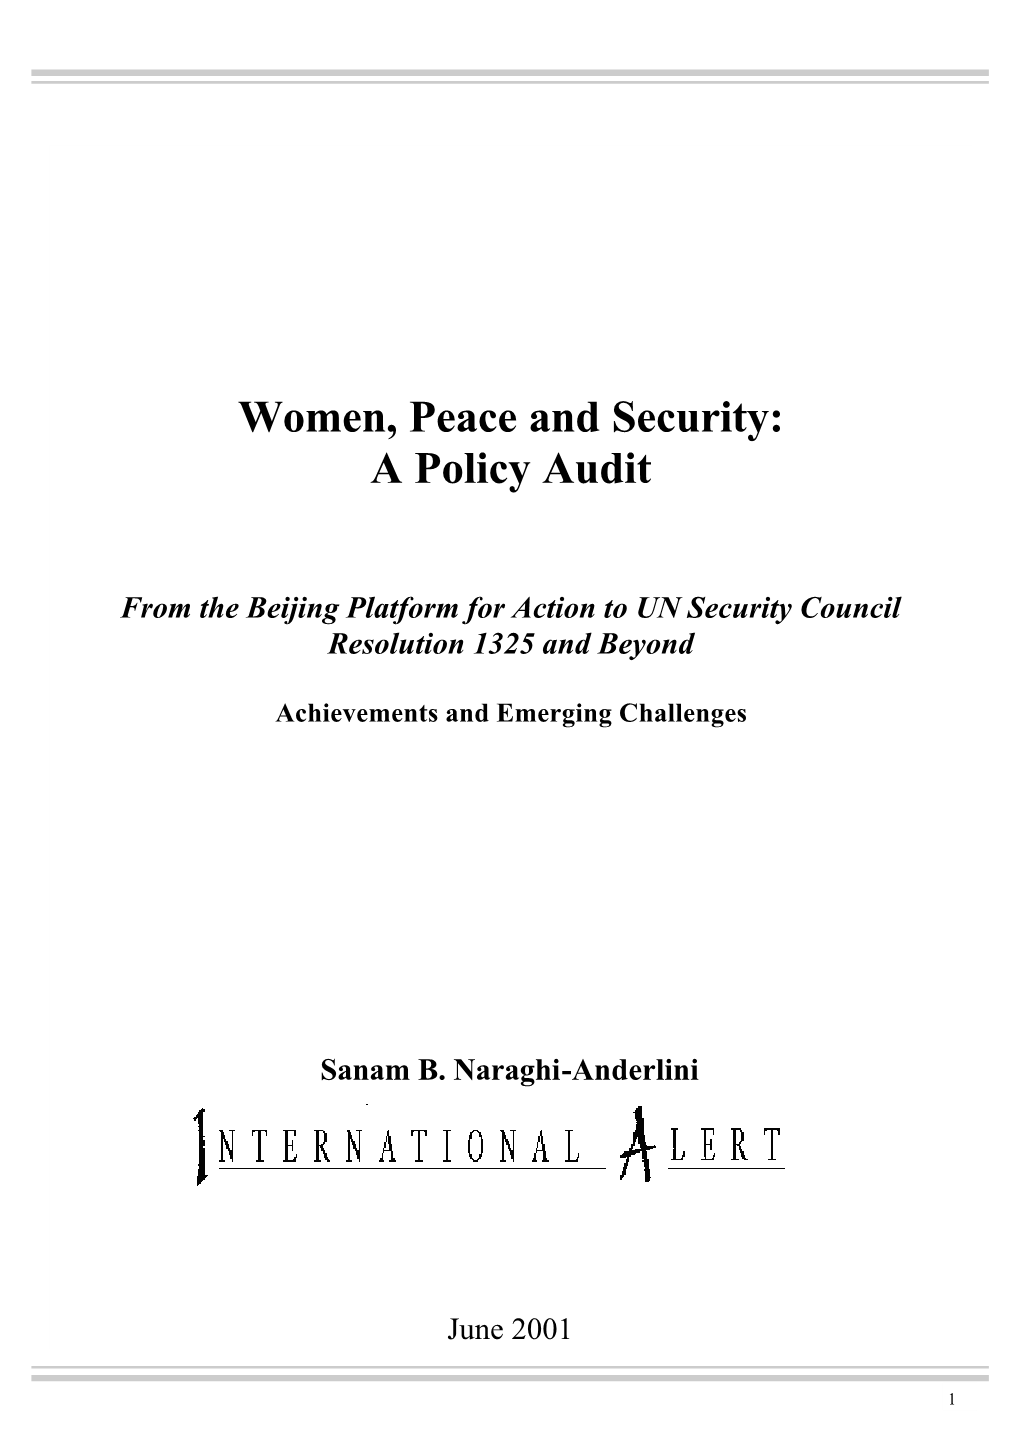 Women, Peace and Security: a Policy Audit